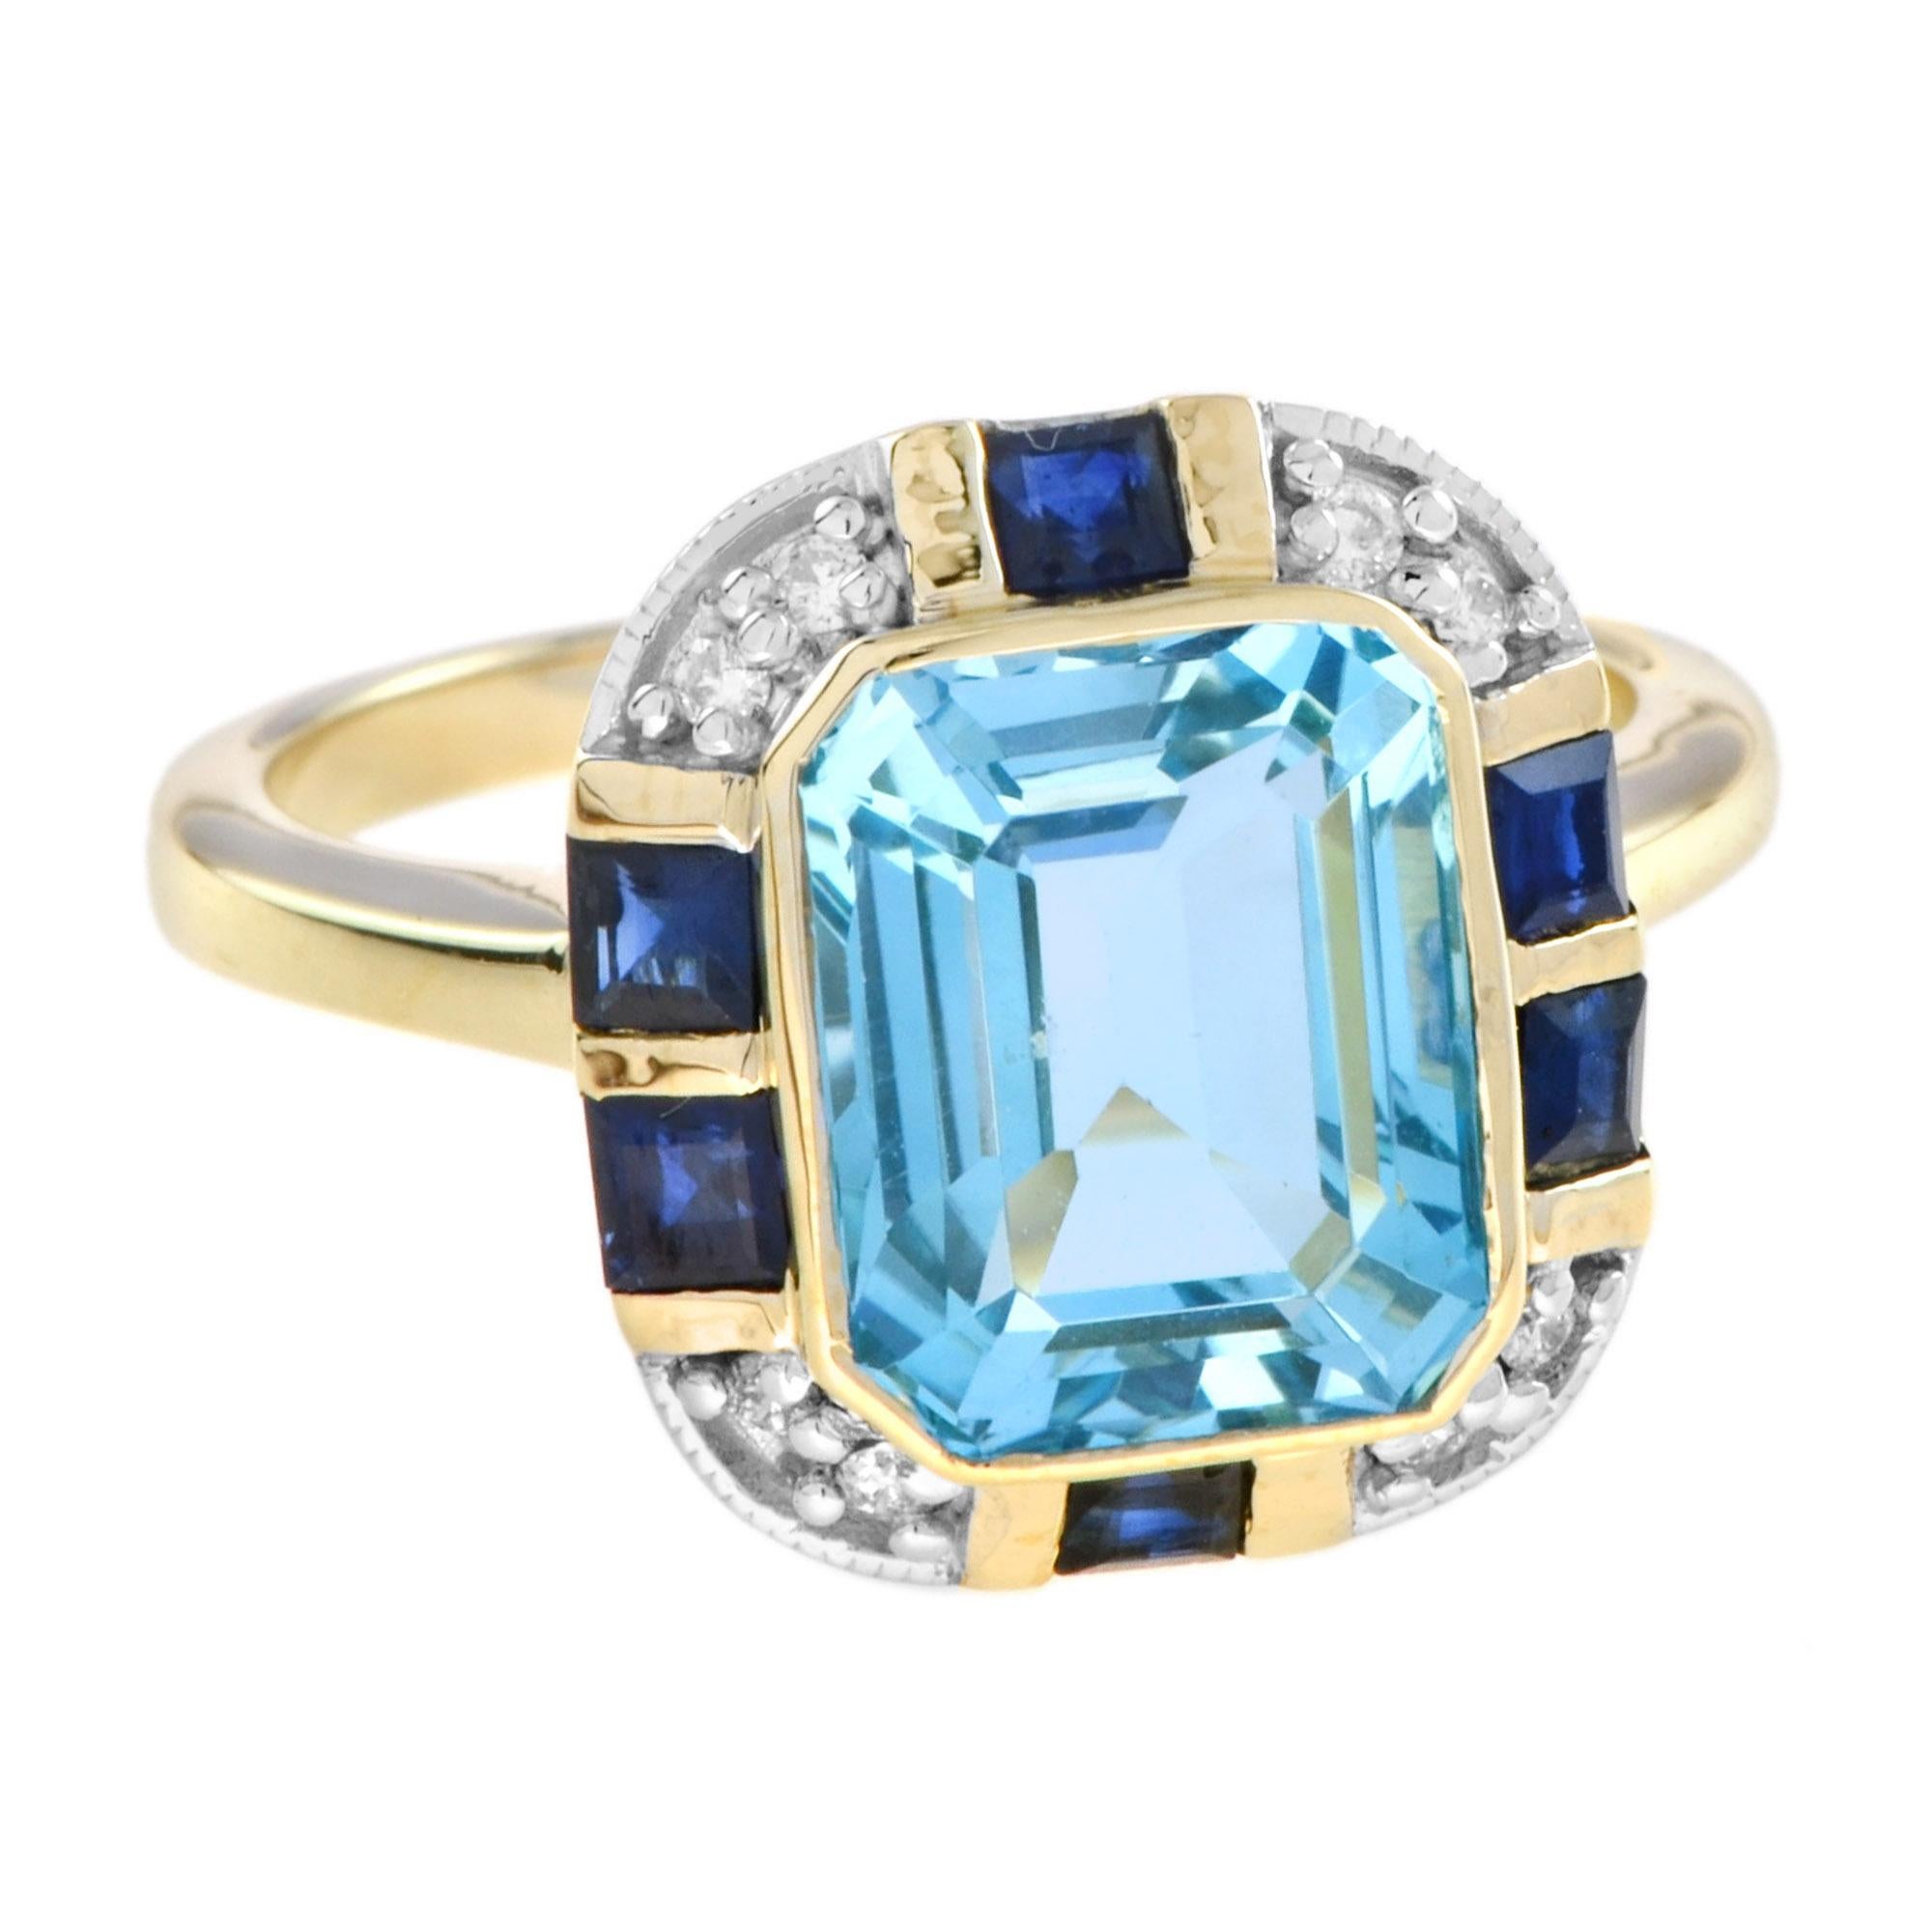 14k gold diamond ring with white topaz and blue sapphire